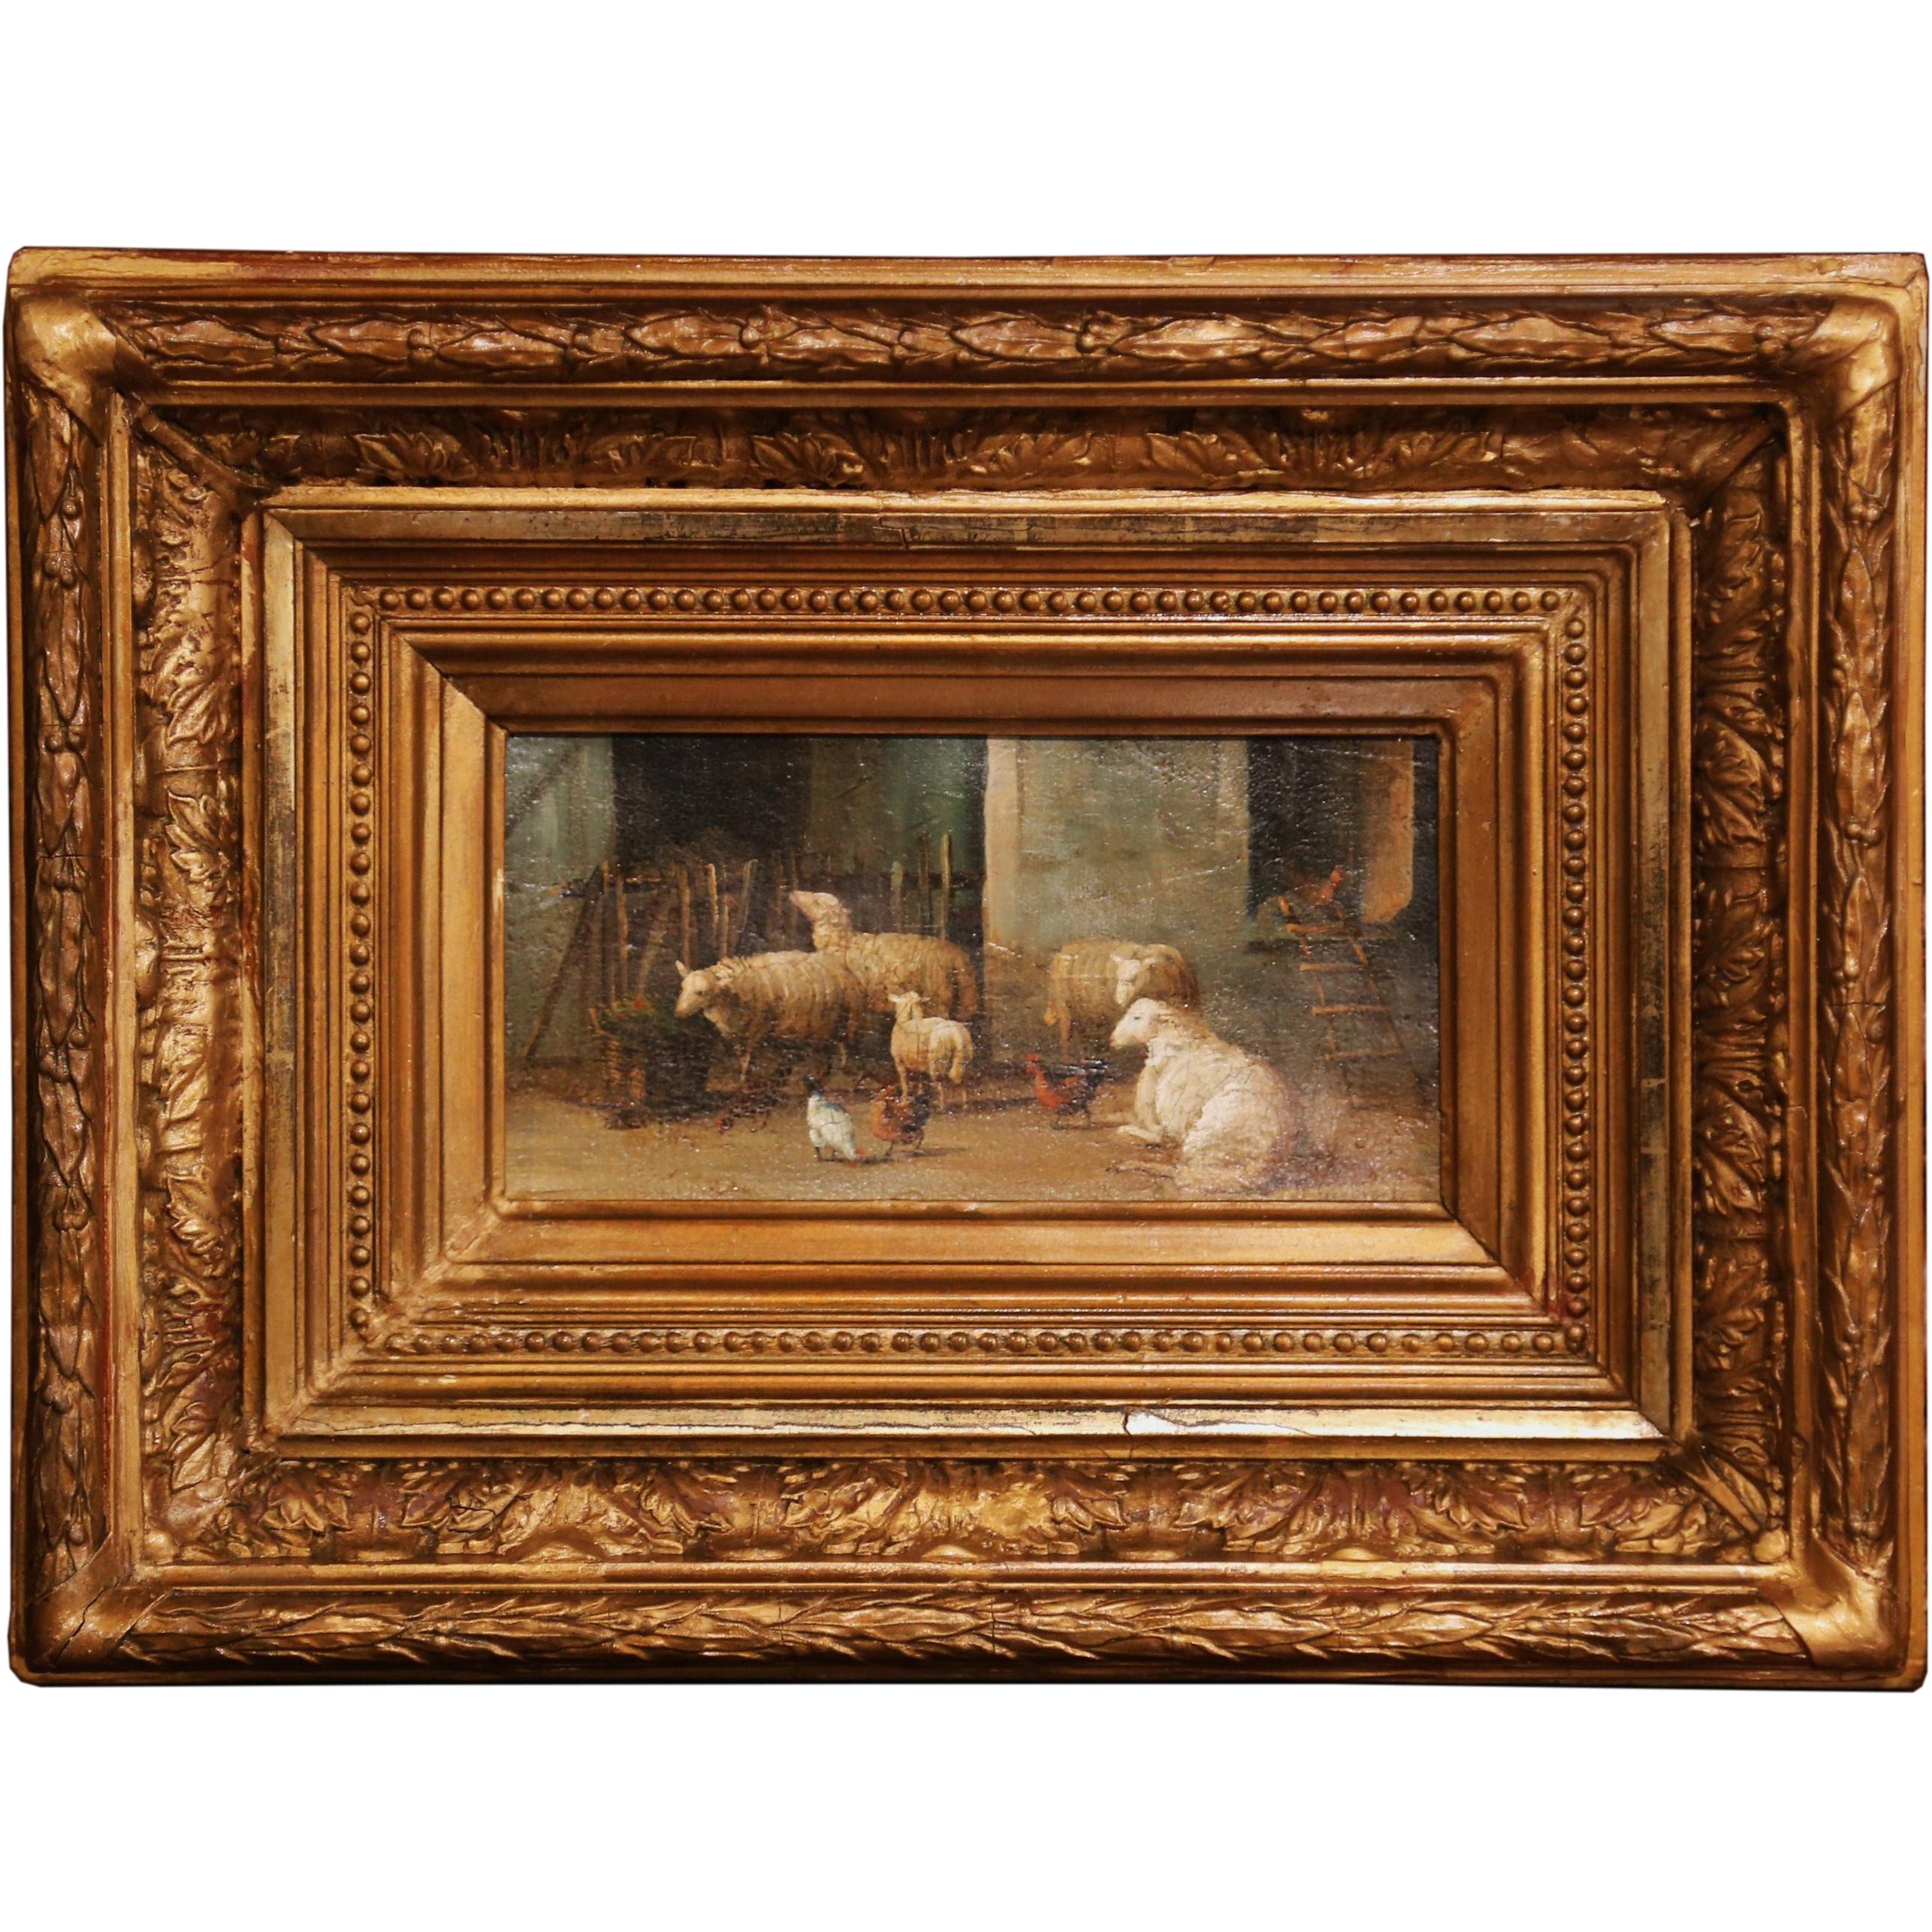 Bring the peaceful charm of the countryside into your home with this oil on canvas painting. Painted circa 1860, this composition is set inside its original gilt wood frame and is signed in the lower right corner by Belgium painter, J. Scholaerts.